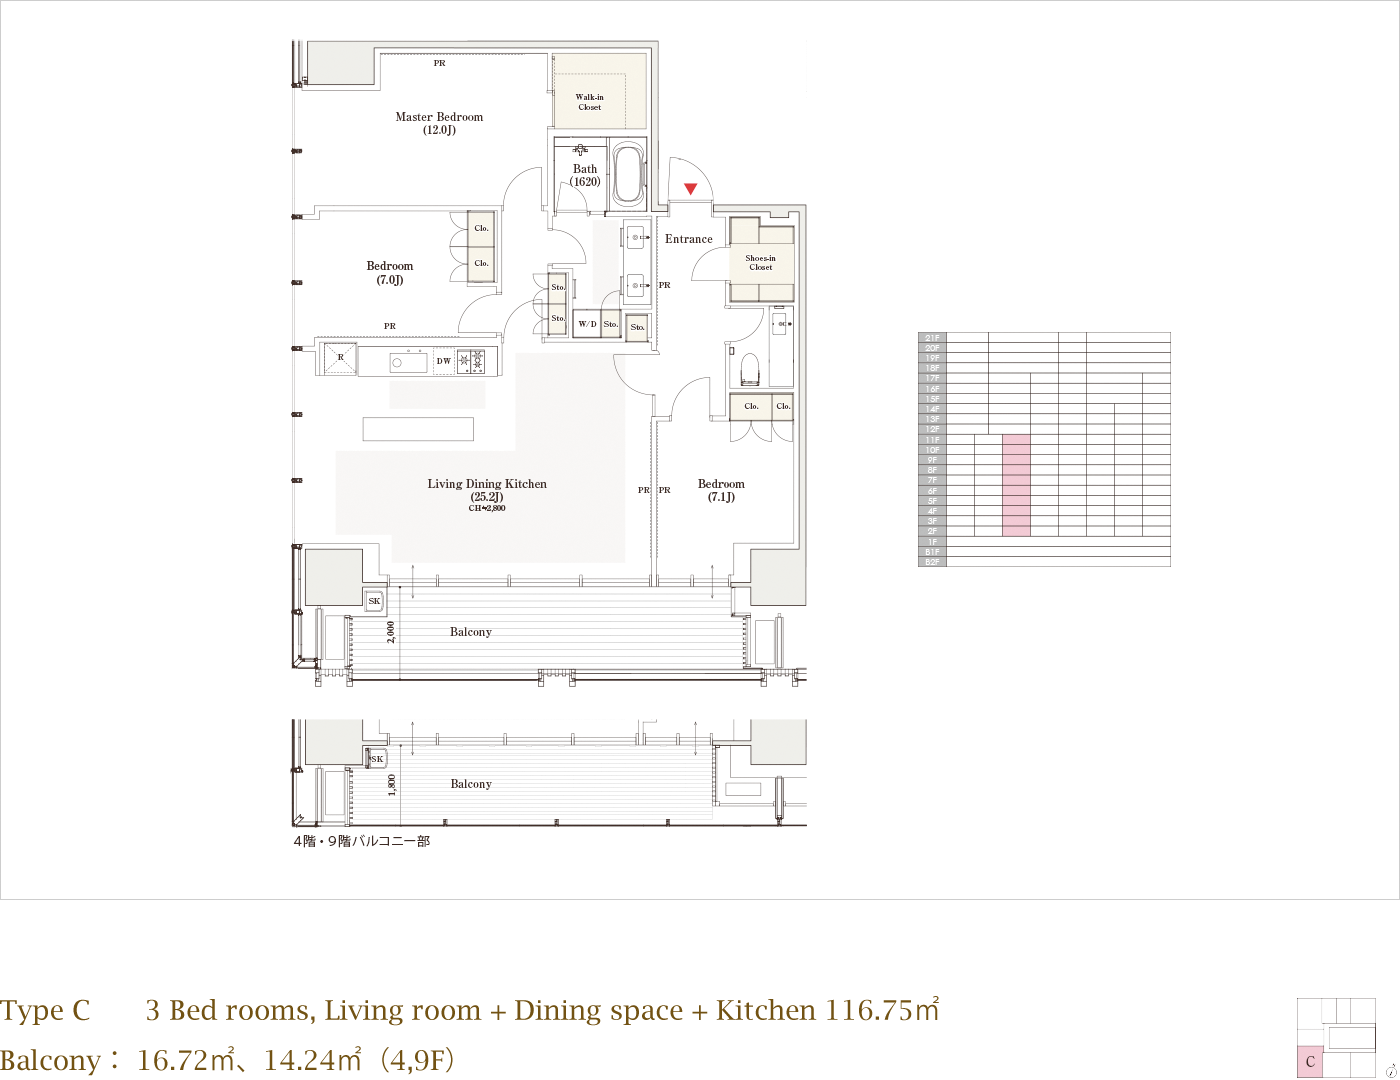 Type C 3 Bed rooms, Living room + Dining space + Kitchen 116.75m² Balcony 16.72m²,14.24m²(4F,9F)